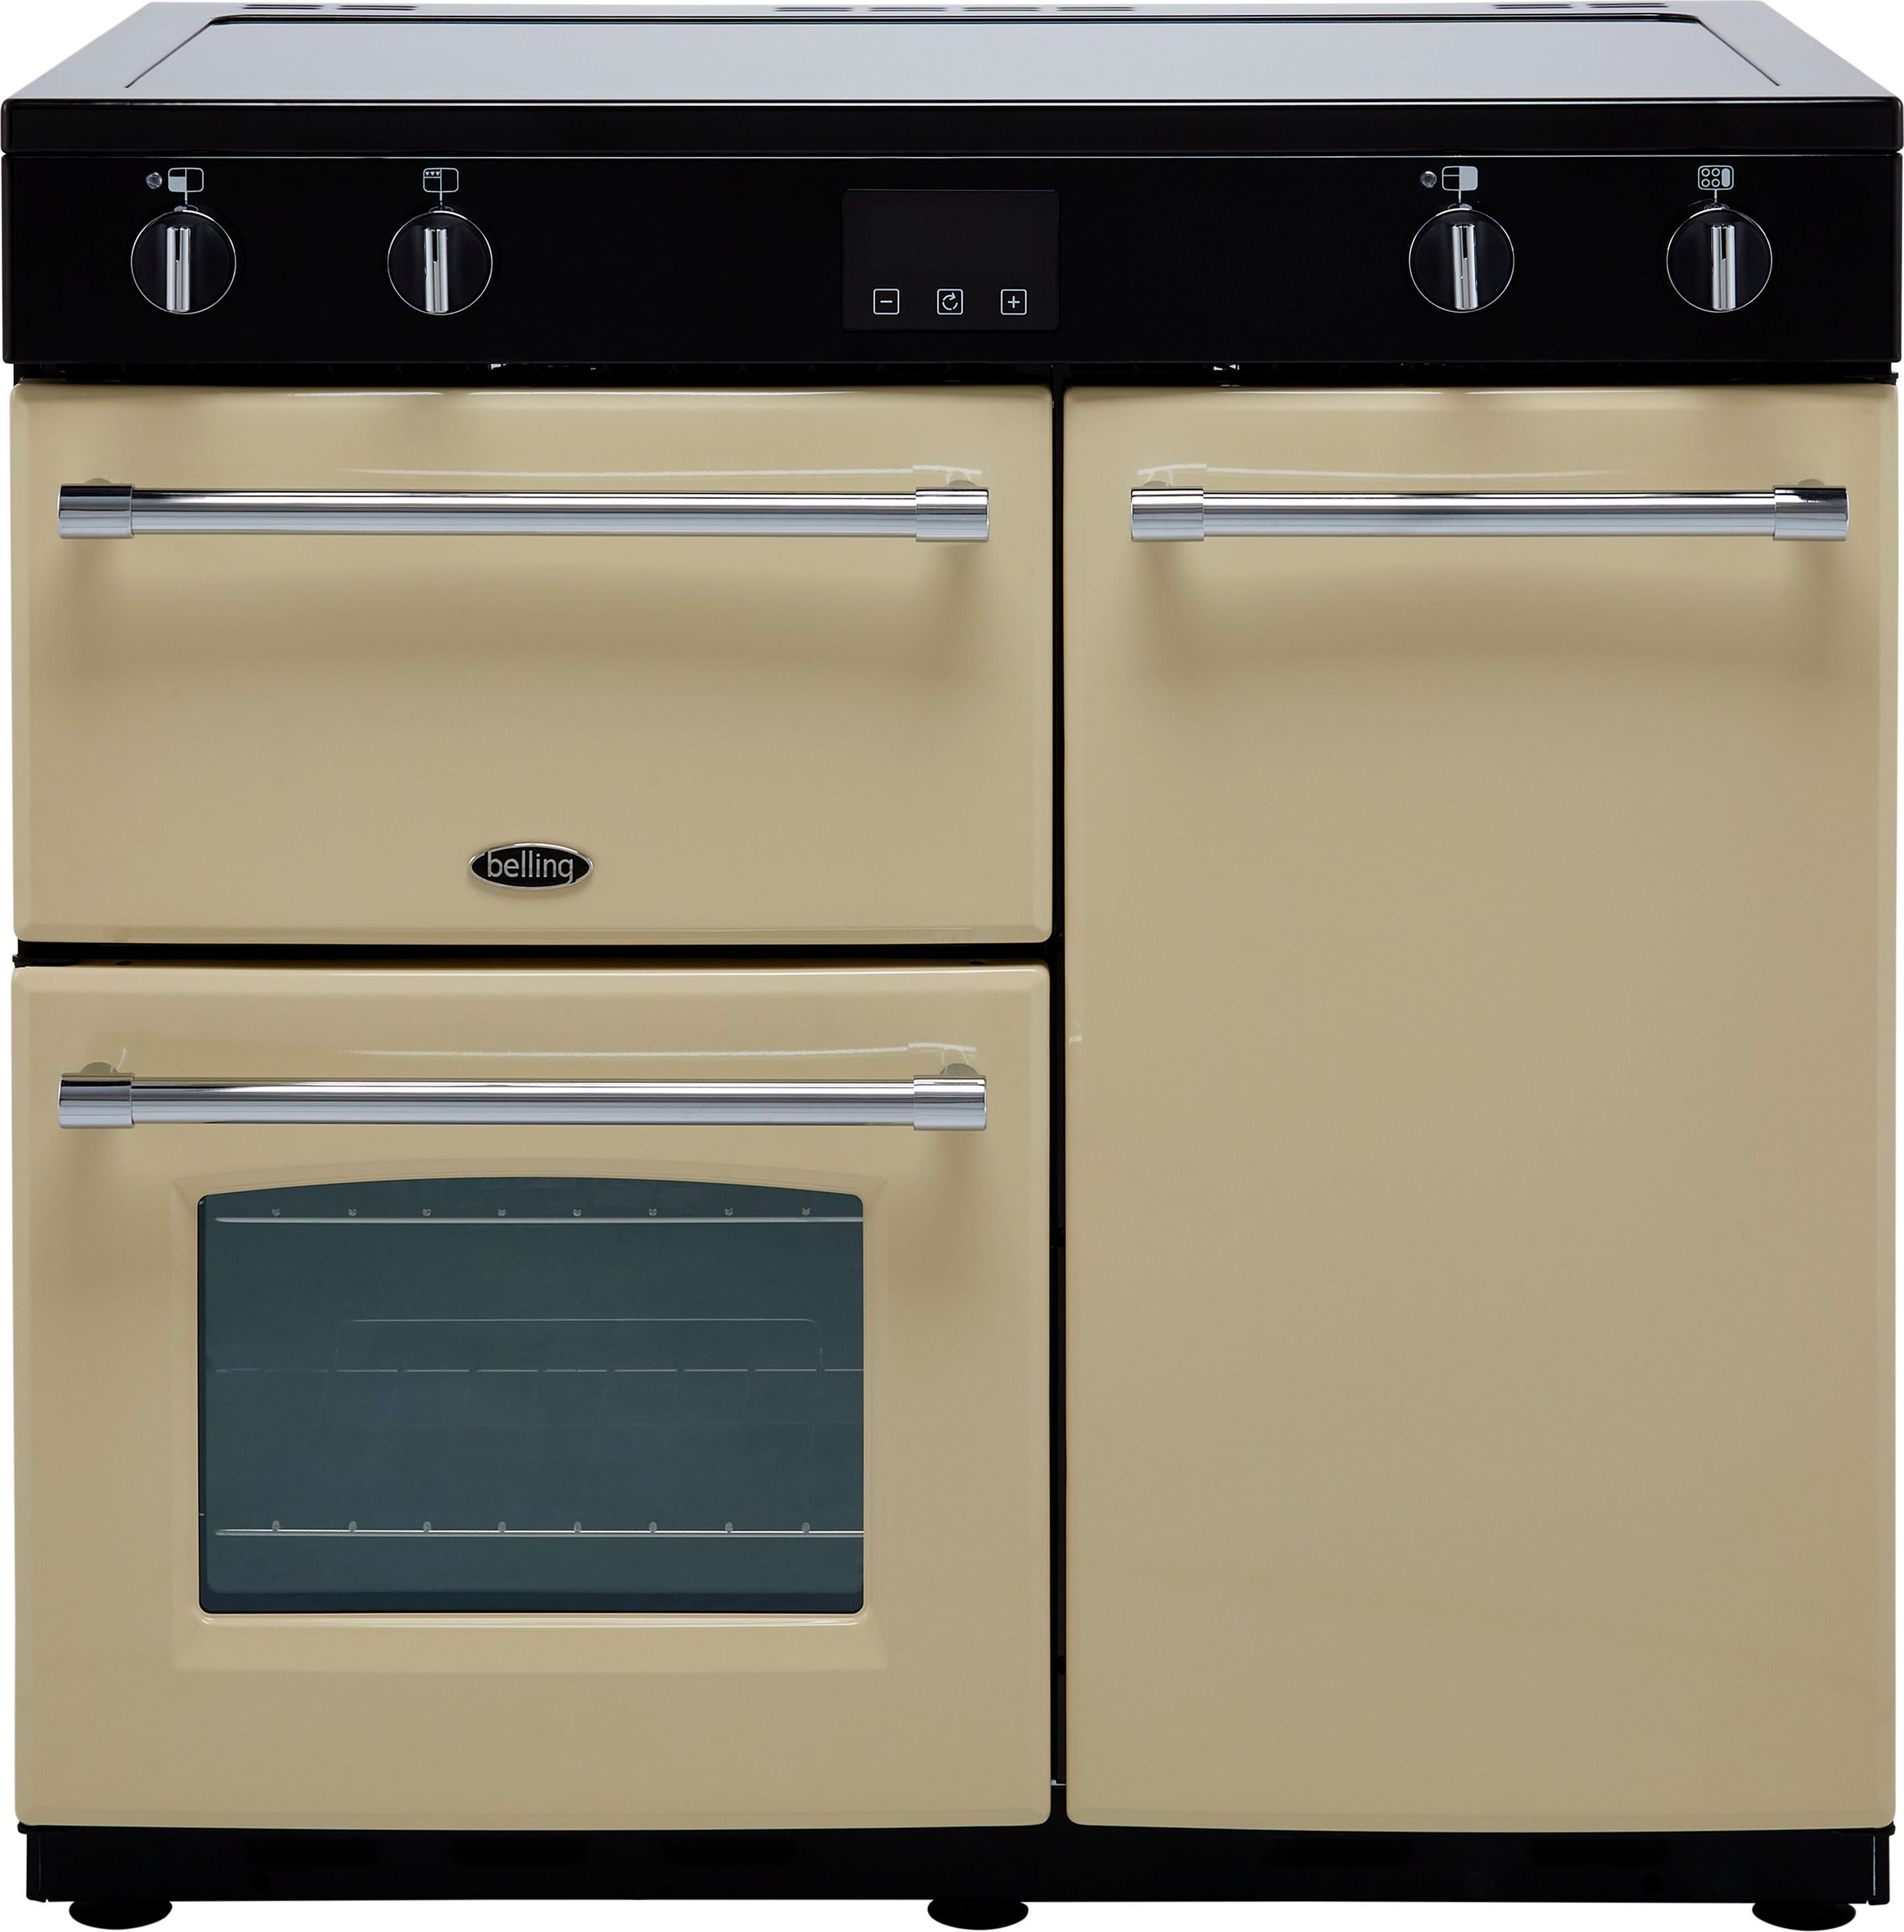 Belling Farmhouse90Ei 90cm Electric Range Cooker with Induction Hob - Cream - A/A Rated, Cream